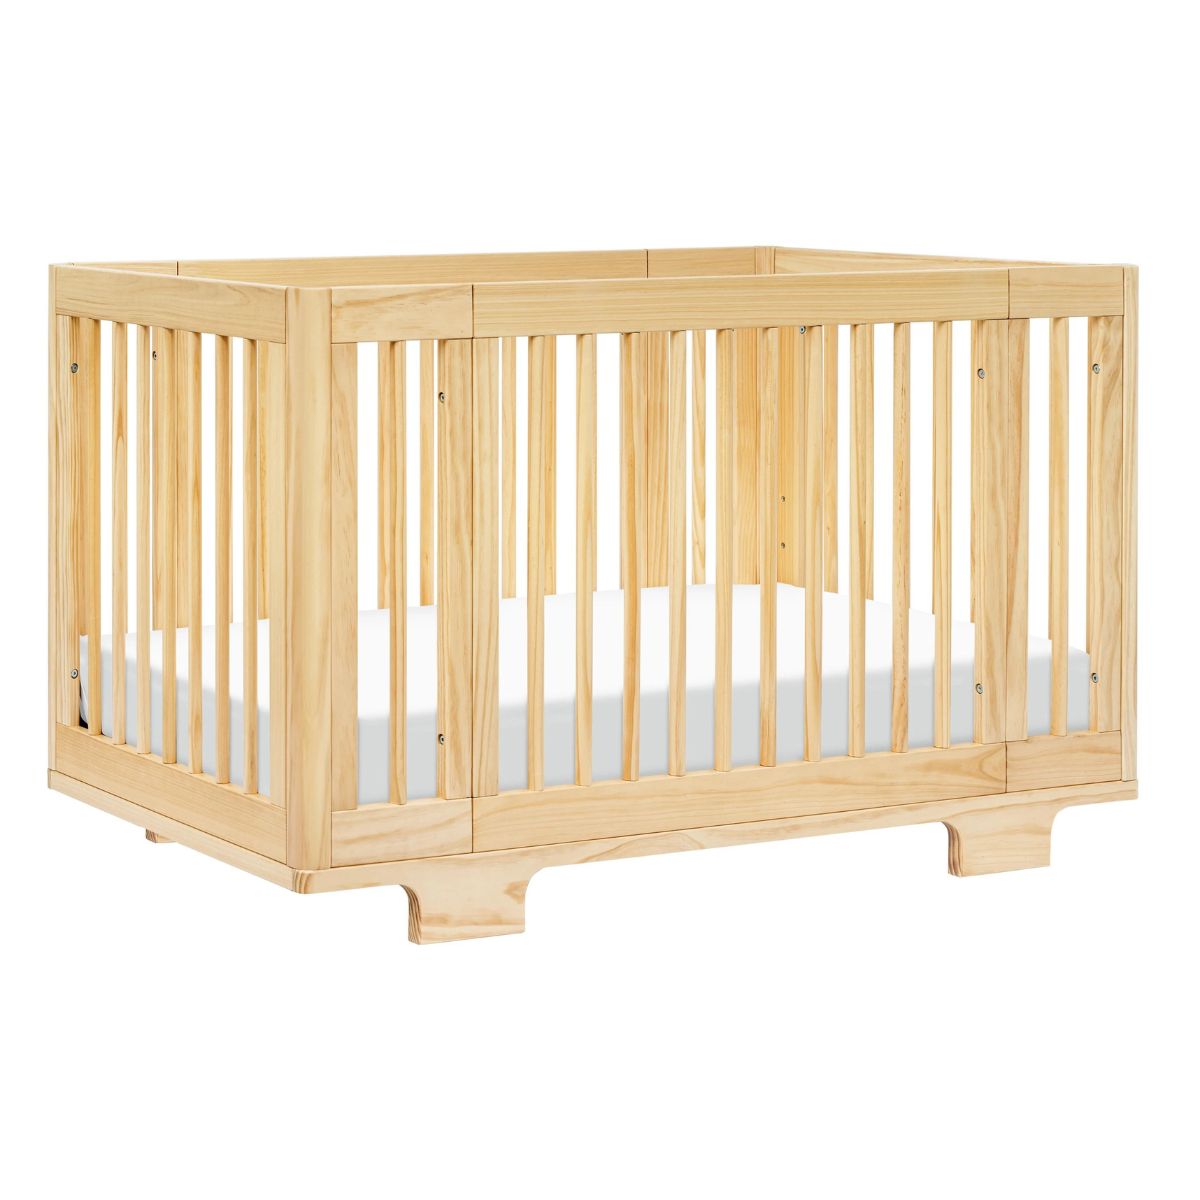 Babyletto Yuzu 8-in-1 Convertible Crib with All-Stages Conversion Kits - Natural